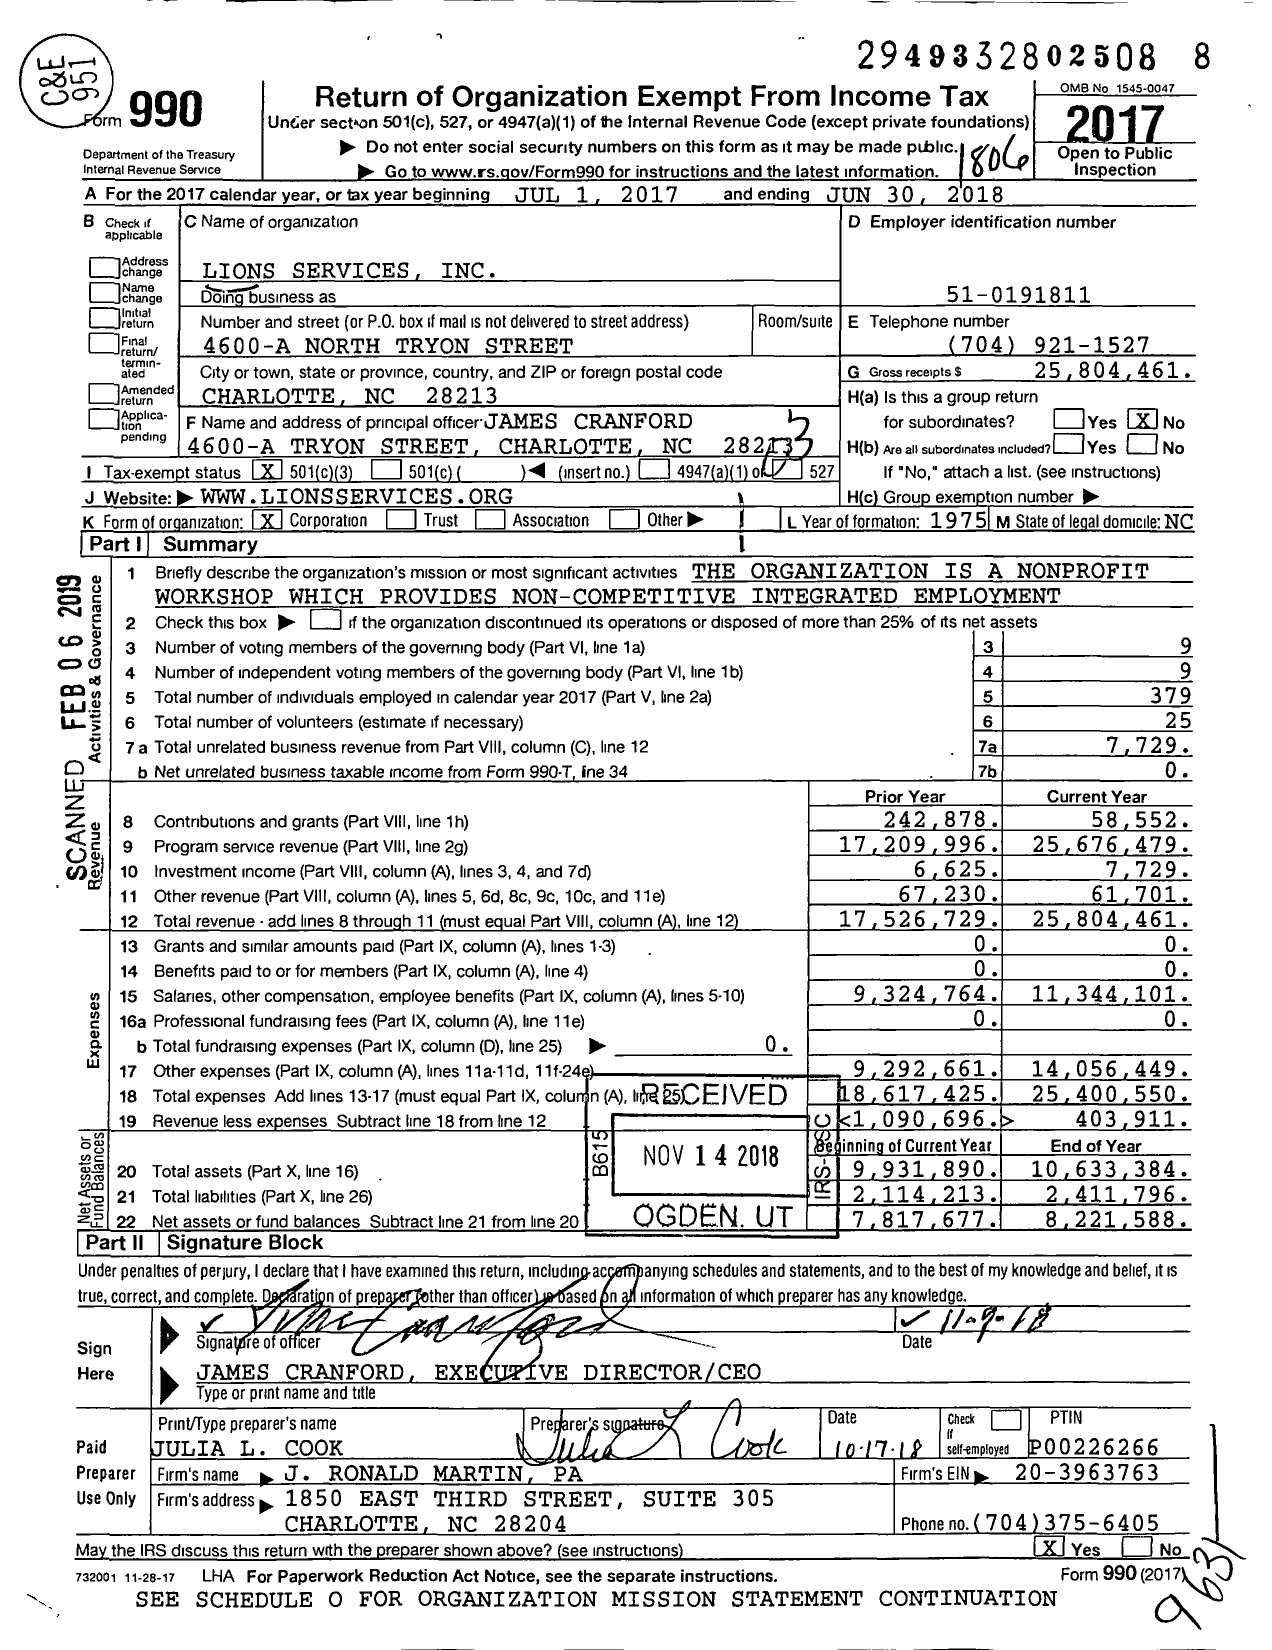 Image of first page of 2017 Form 990 for Lions Services